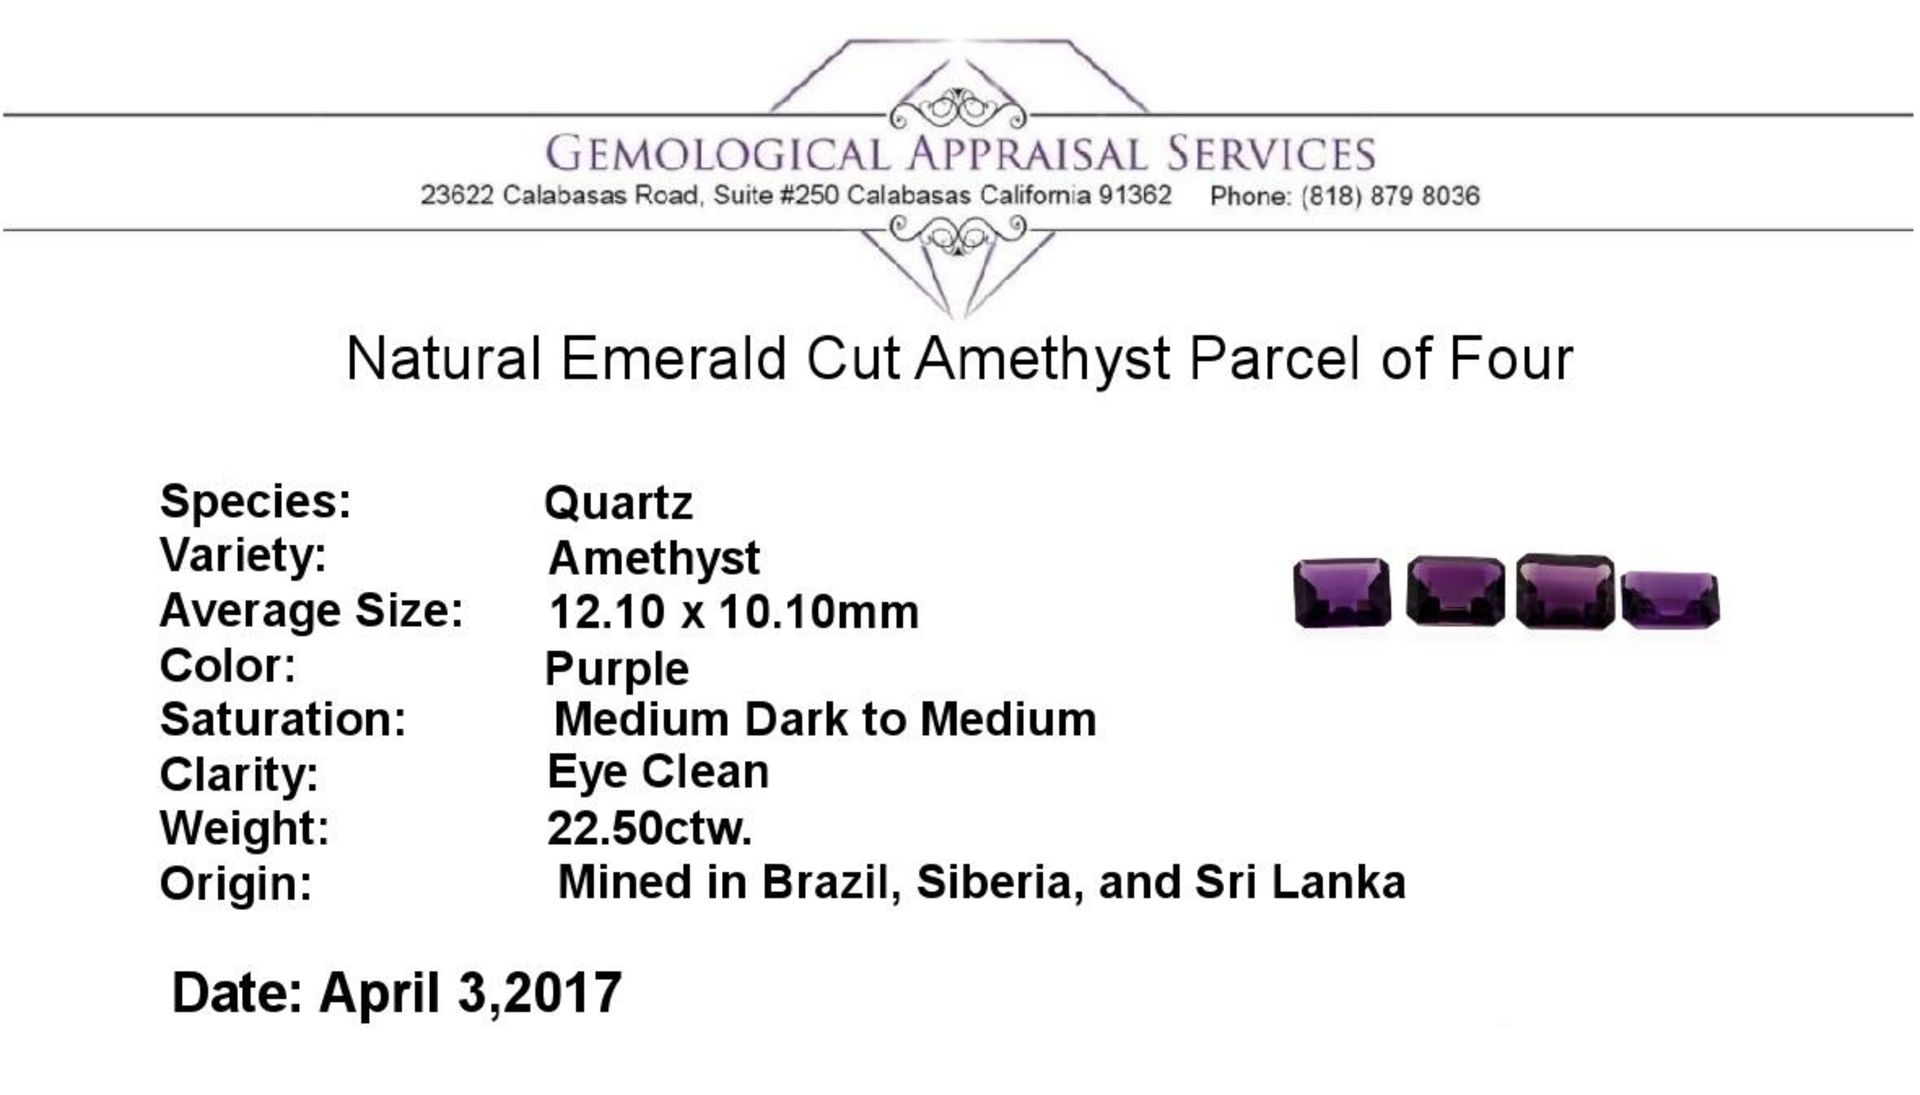 22.50 ctw. Natural Emerald Cut Amethyst Parcel of Four - Image 3 of 3